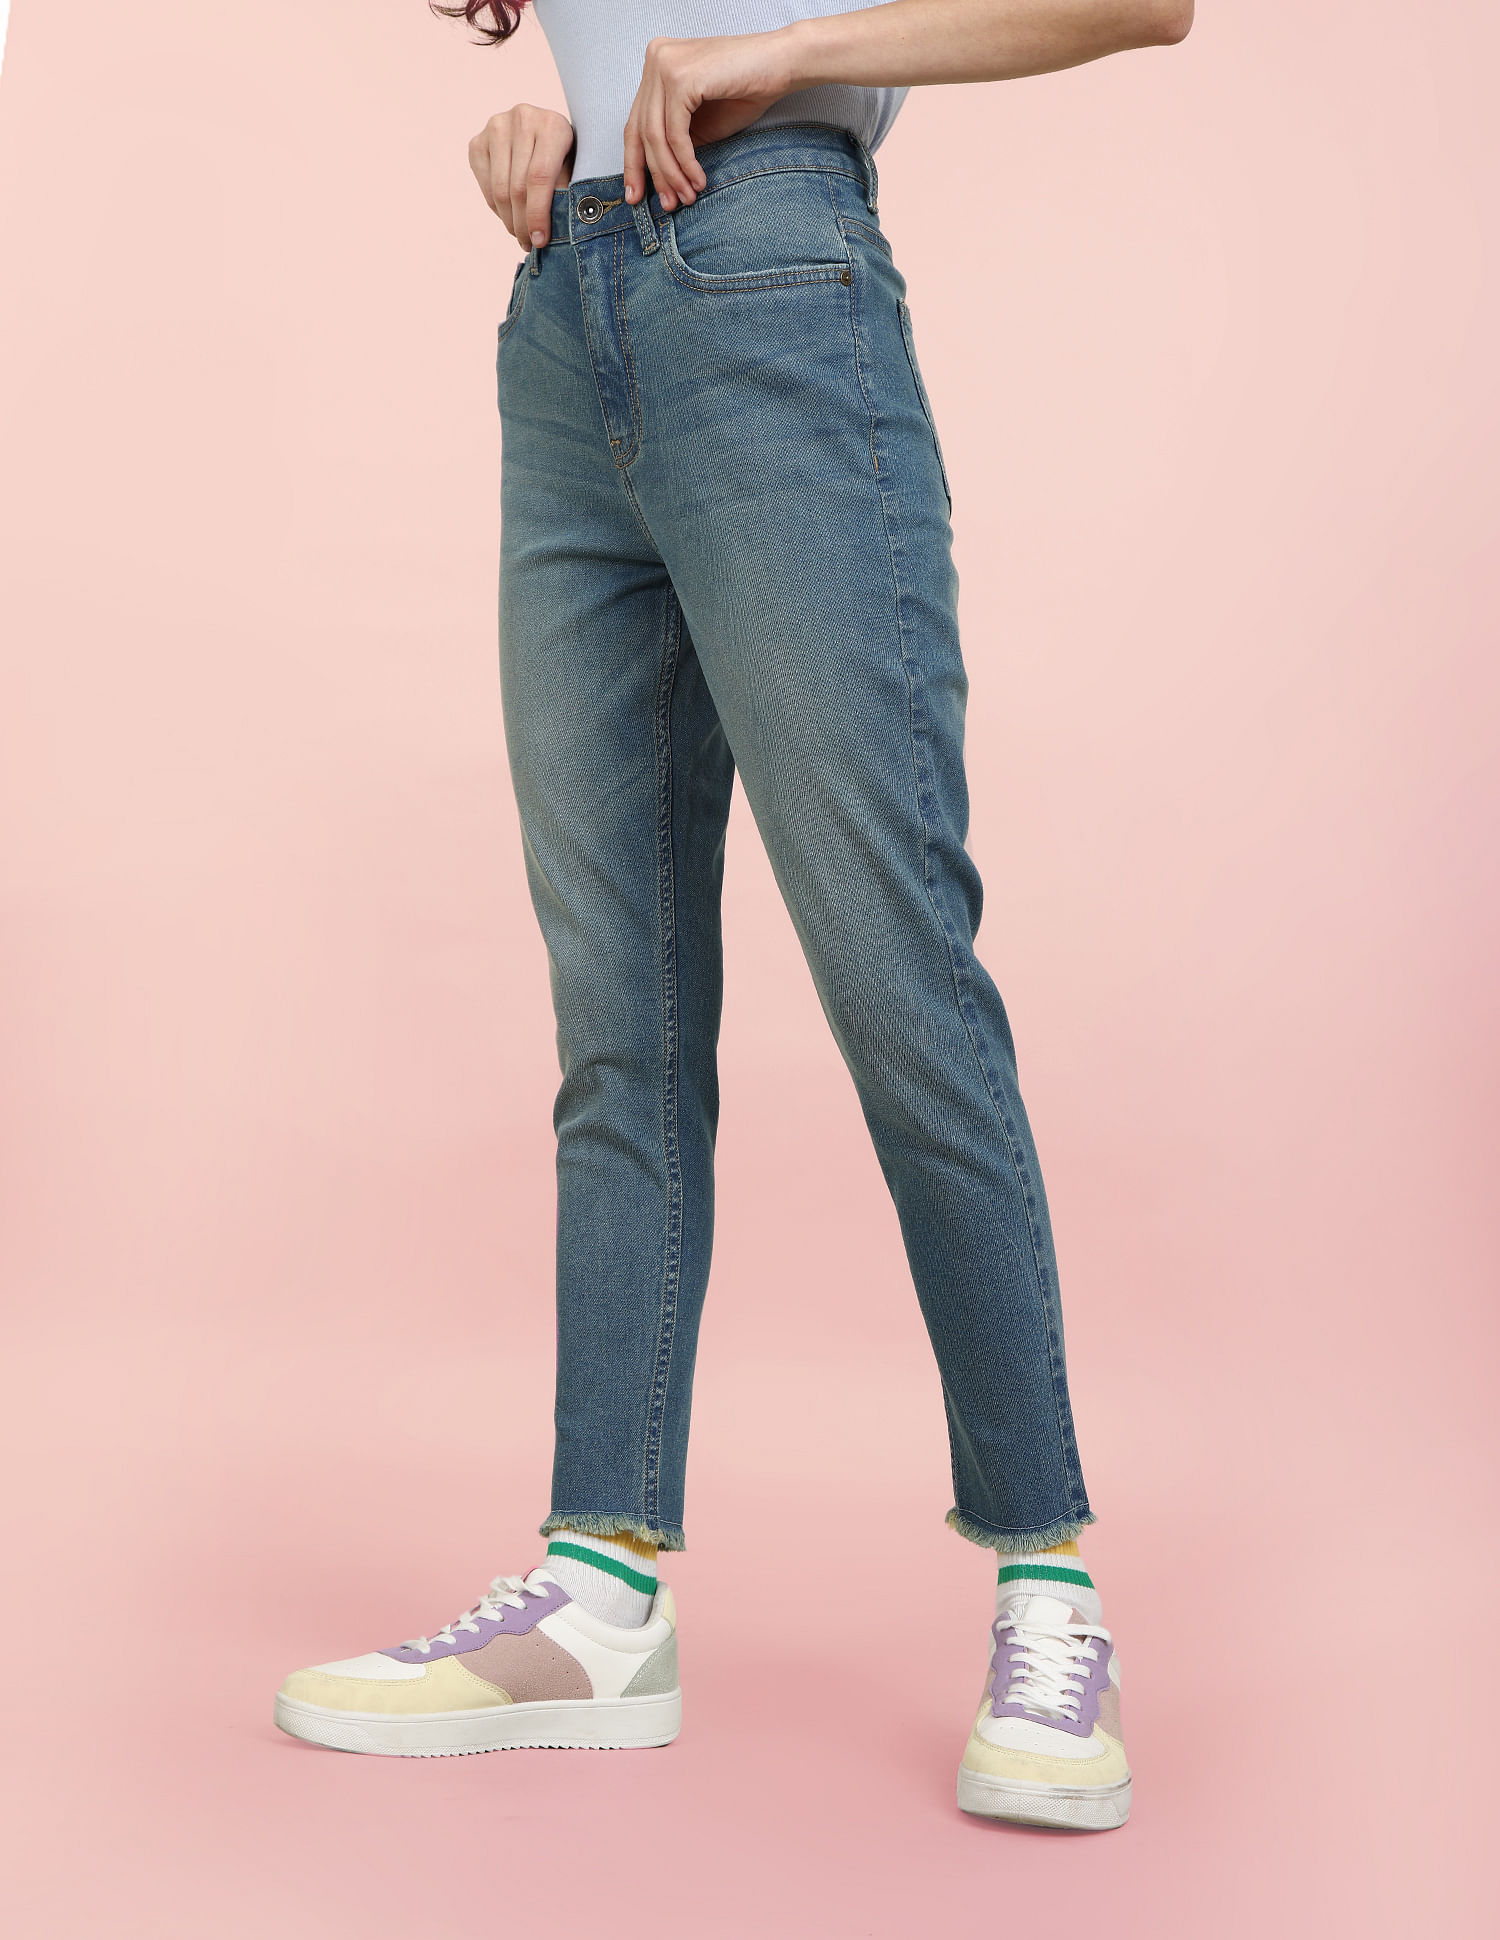 Jeans for Women - Buy Branded Women Jeans & Pants Online in India - NNNOW